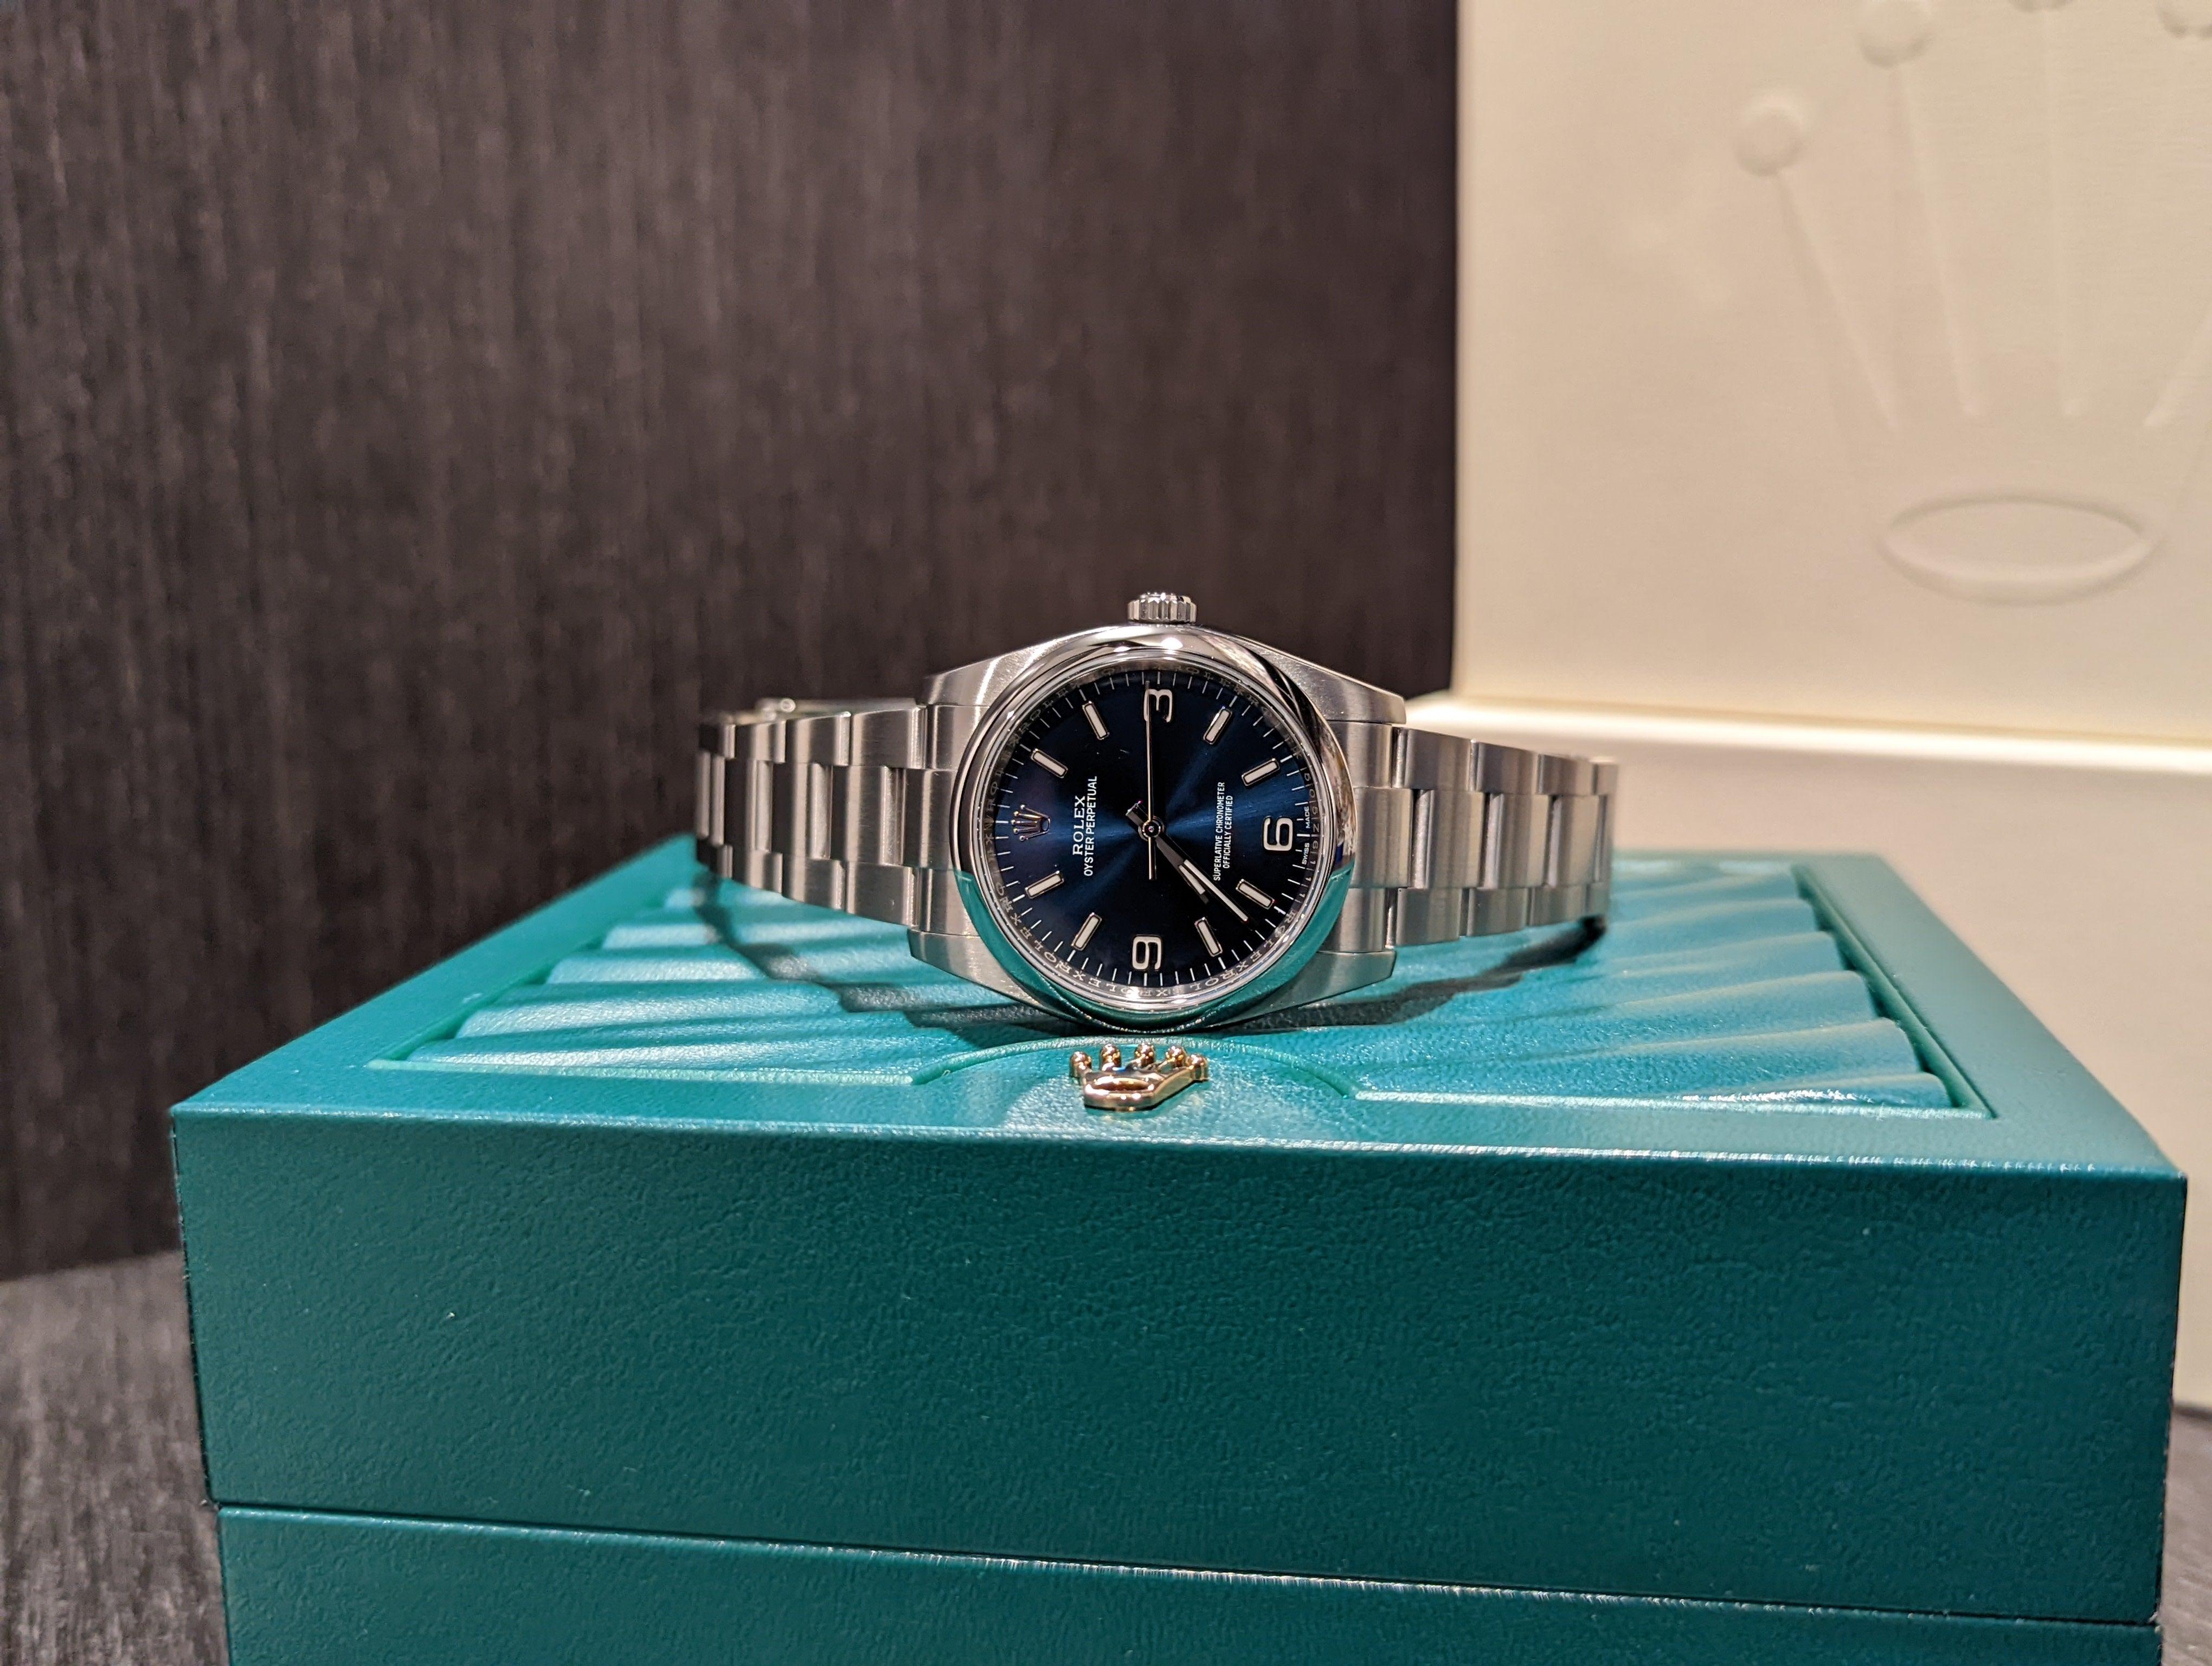 Rolex Oyster Perpetual 36mm - Watch Them Tick